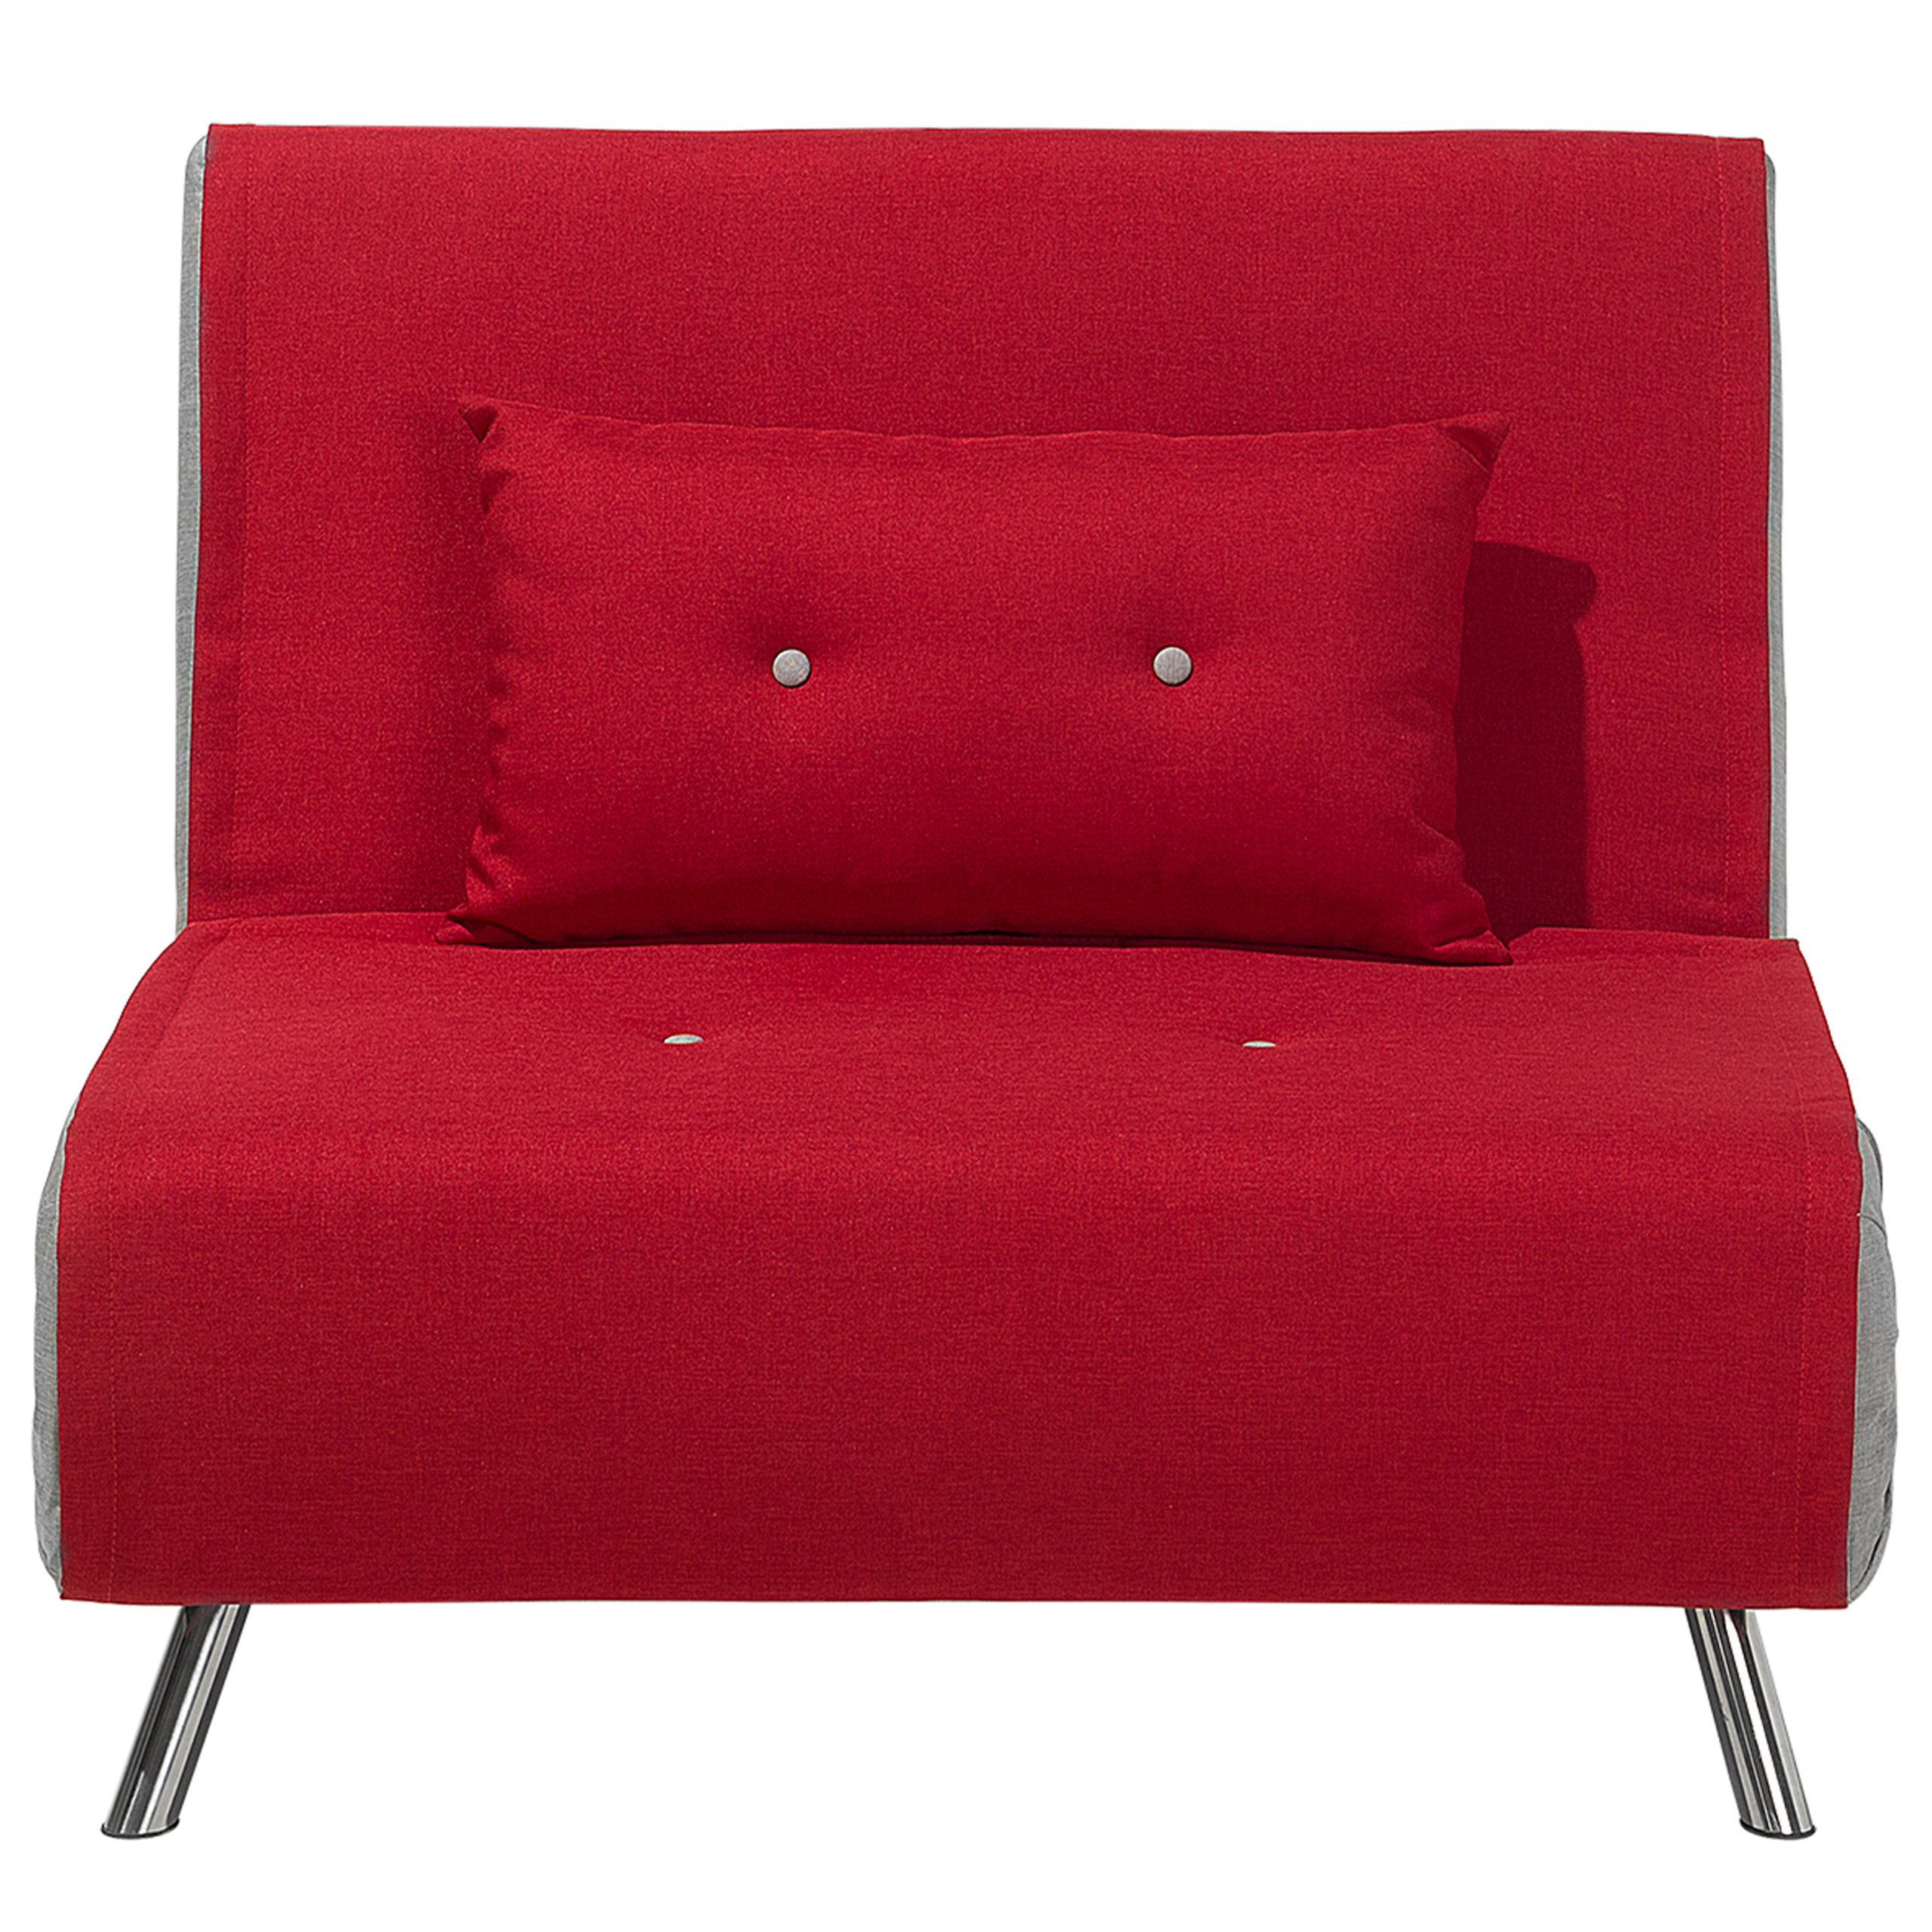 Beliani Sofa Bed Red Fabric Upholstery Single Sleeper Fold Out Chair Bed